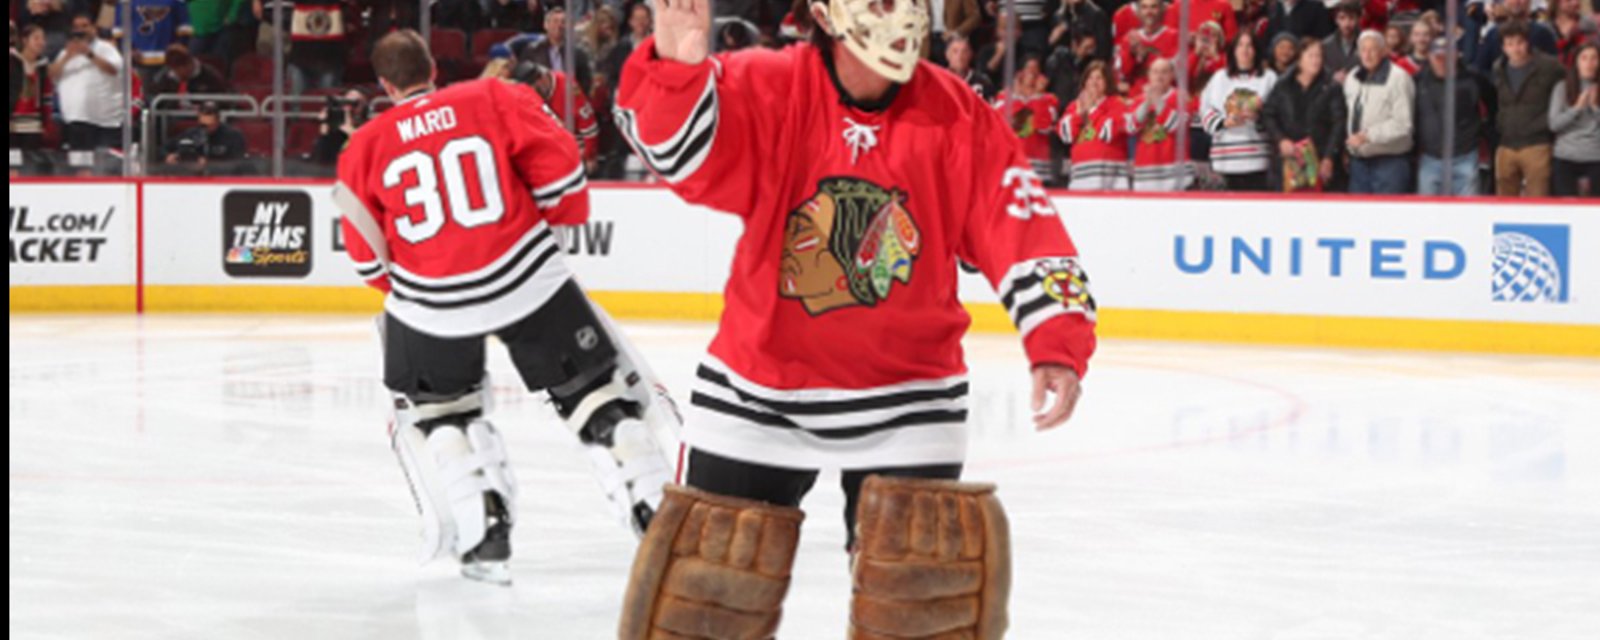 Phil and Tony Esposito bring Blackhawks fans to their feet with “One More Shift”